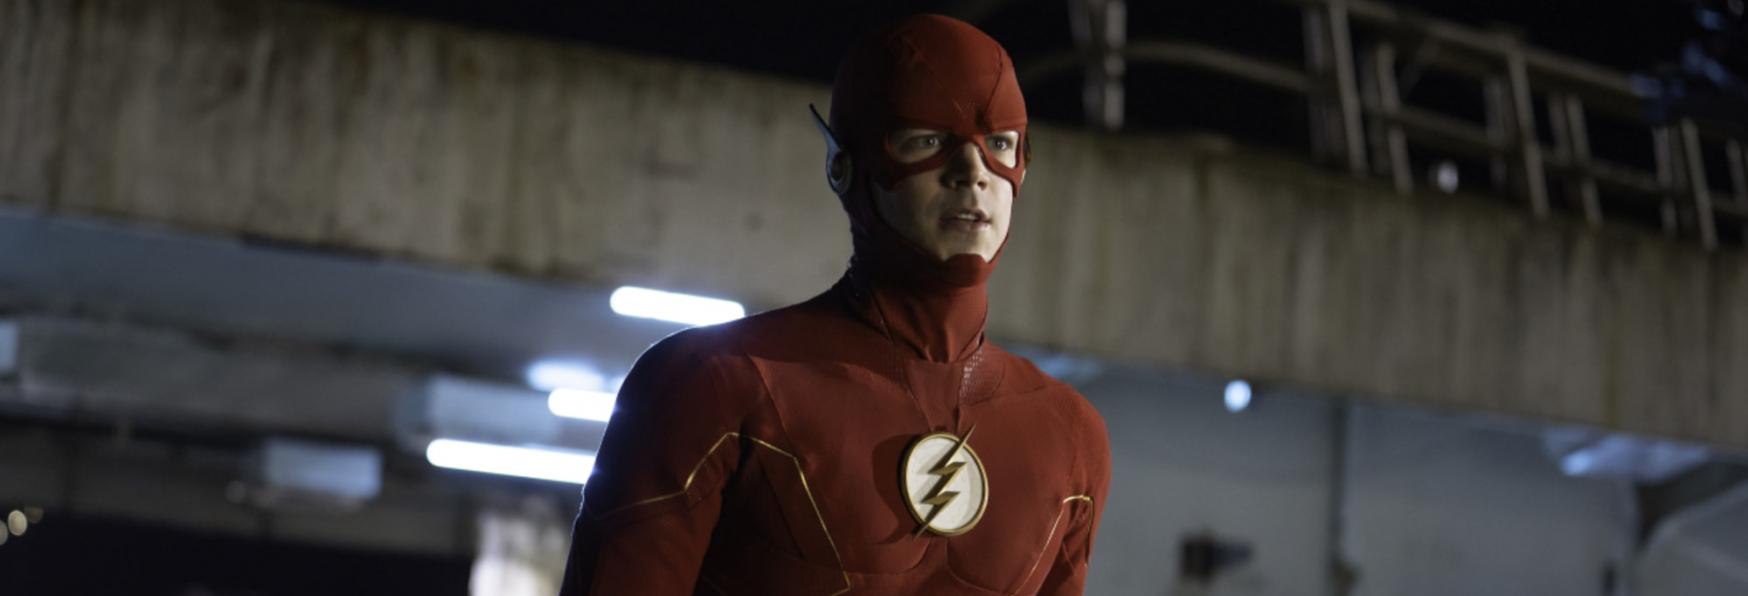 The Flash 8x18: the Promo of the new Episode reveals an Unexpected Return